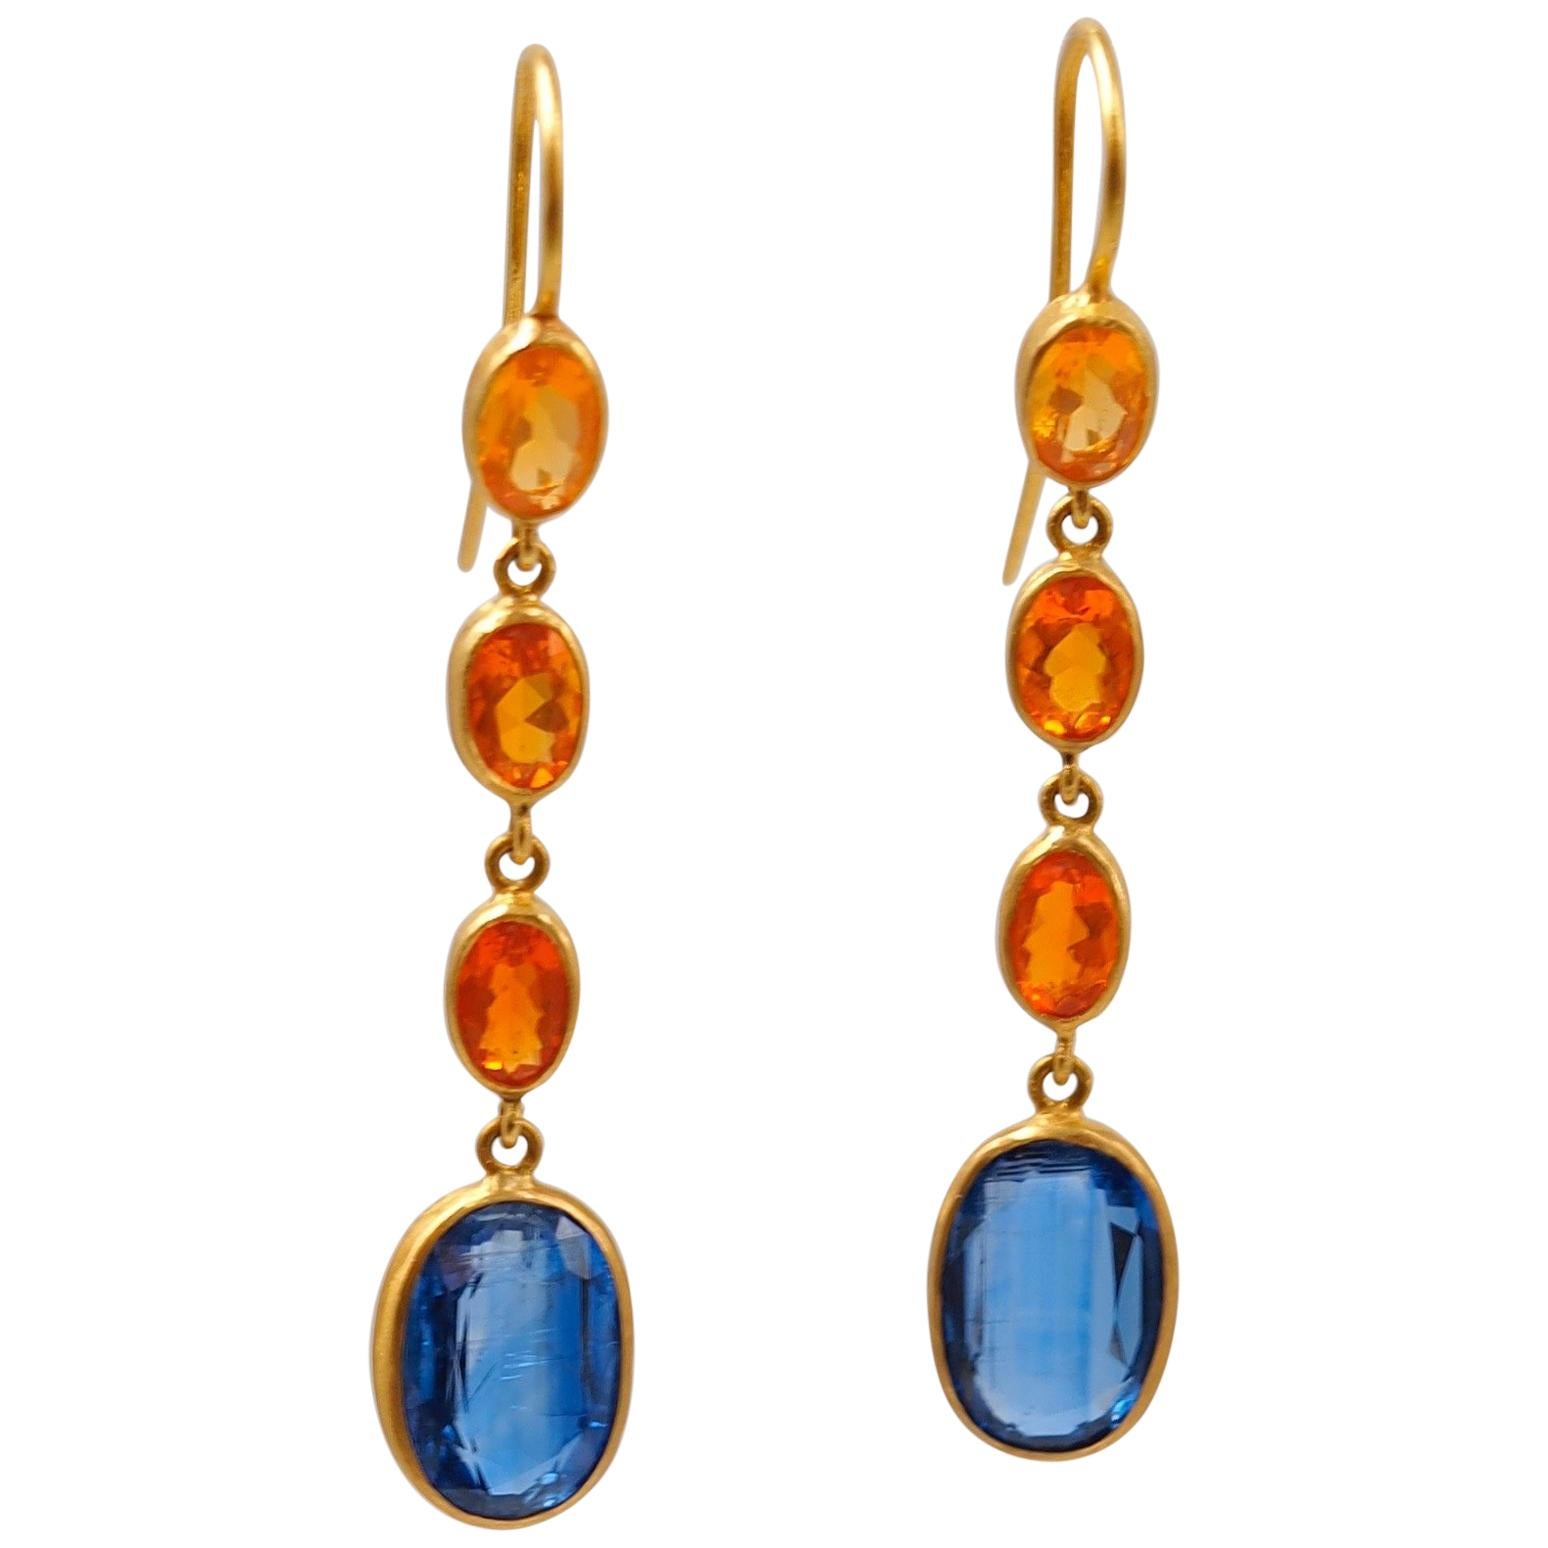 These colourful earrings by Scrives are composed of 6 oval fire opals with 3 shades of orange for a total weight of 1.71 cts. 
The earrings are ending with 2 kyanites of 3.01 and 3.38 cts. Kyanites are well-known for their similar colour to blue